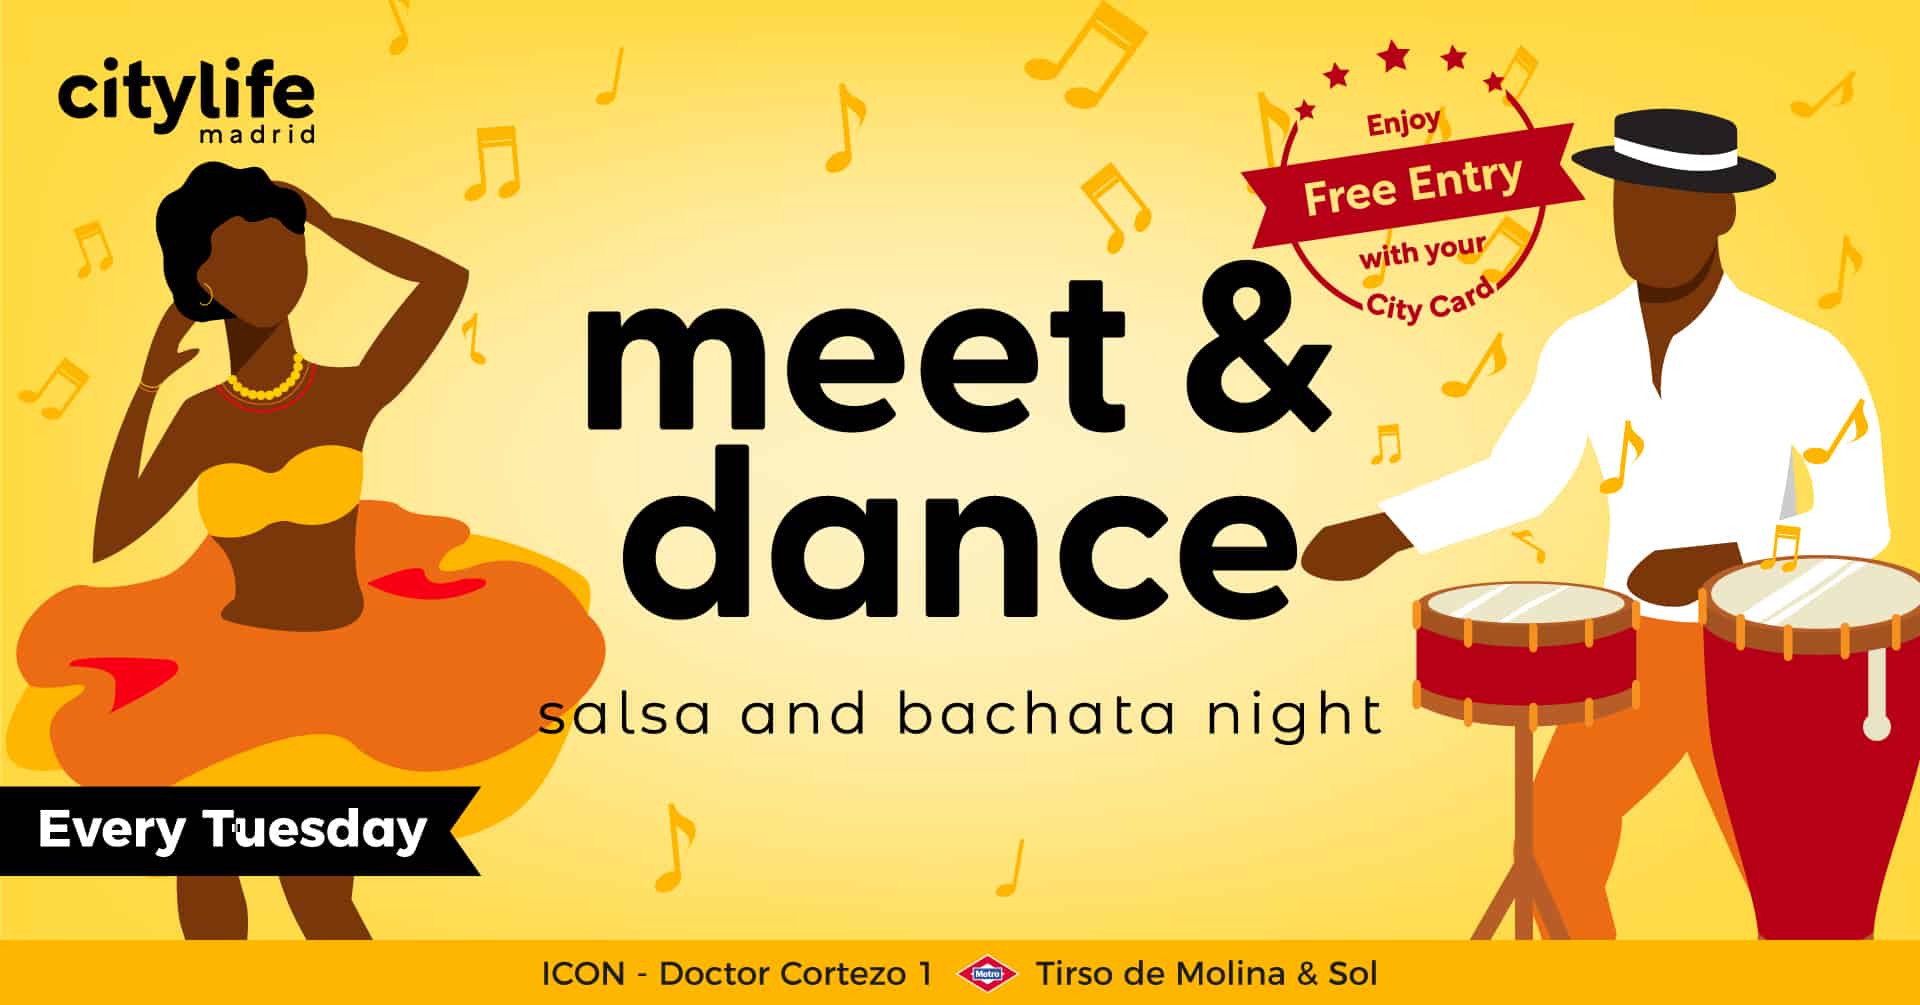 fb-event-banner-meet-and-dance-citylife-madrid